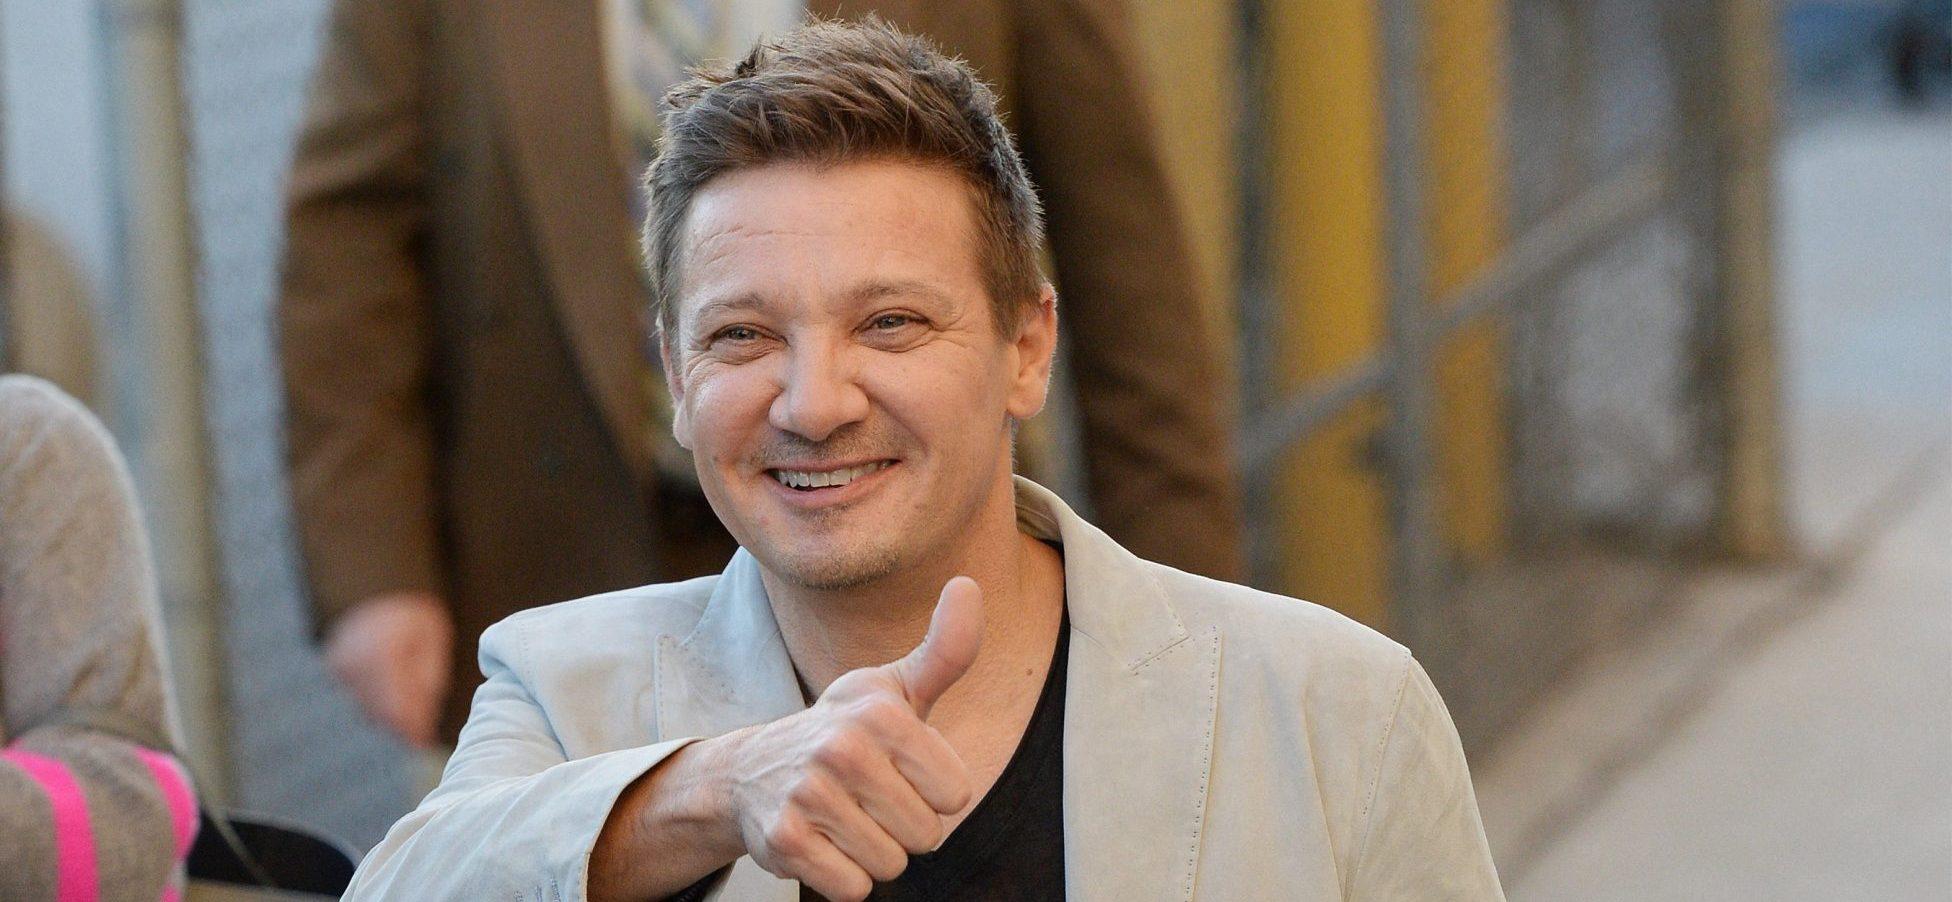 Listen To The Chilling 911 Call In Jeremy Renner's First Interview Since Accident